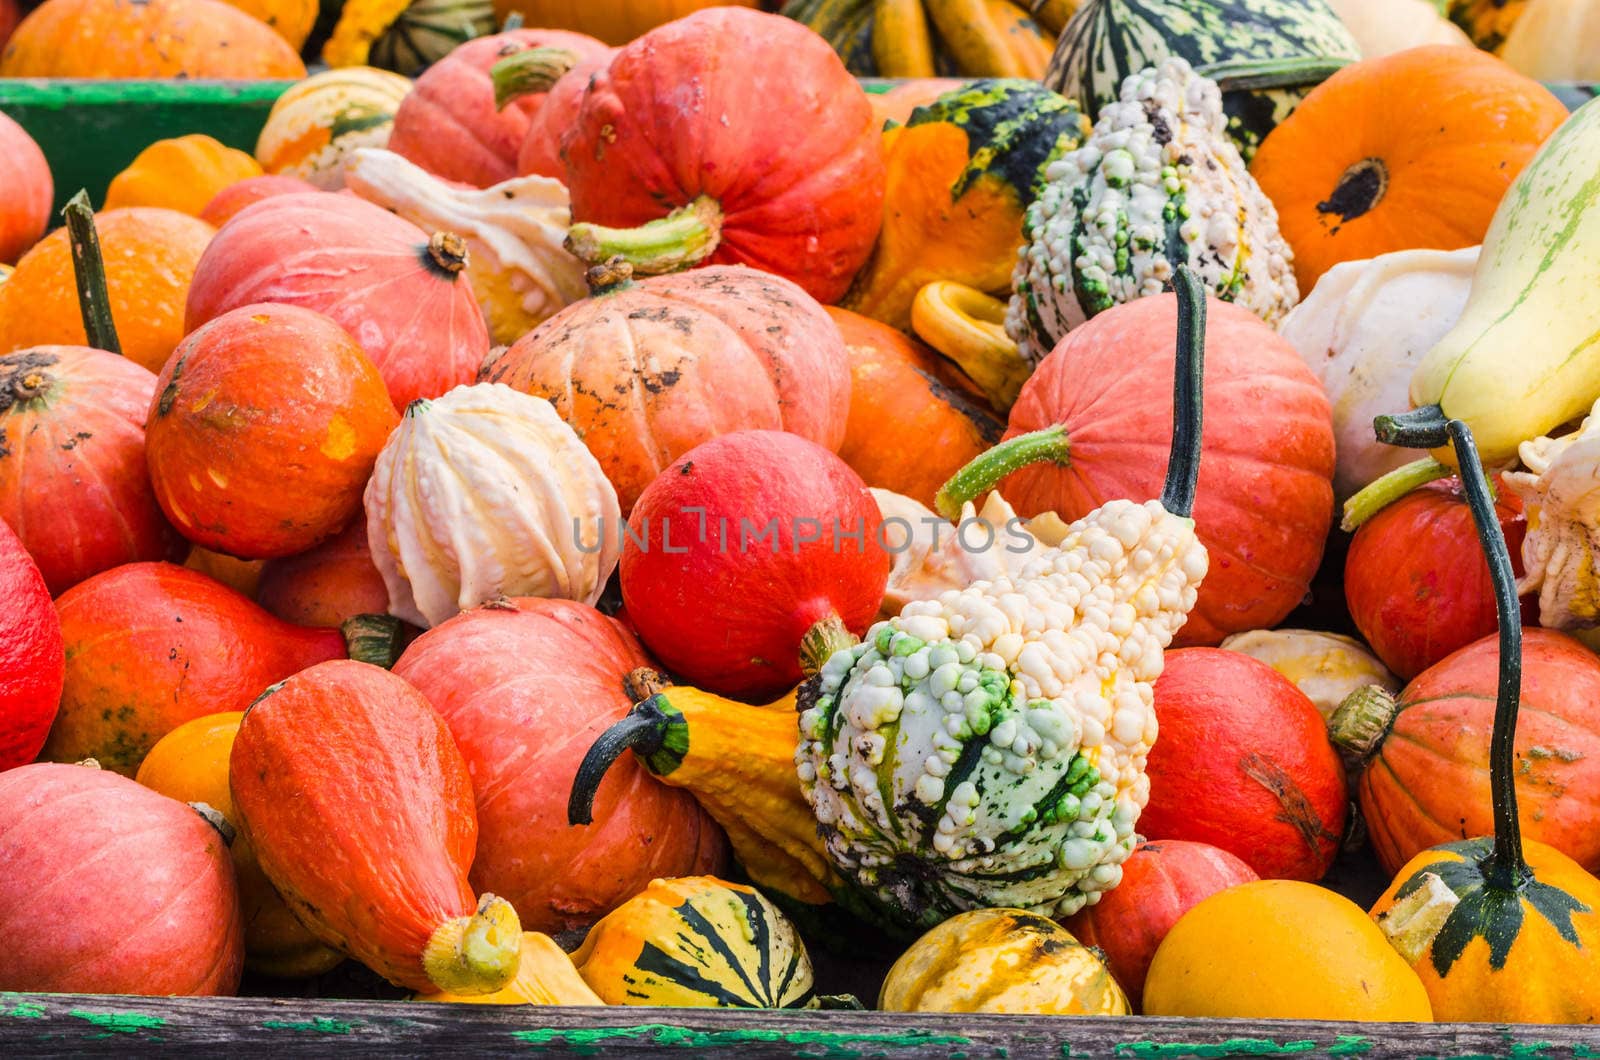 Various pumpkin varieties in diverse
Colors and shapes.